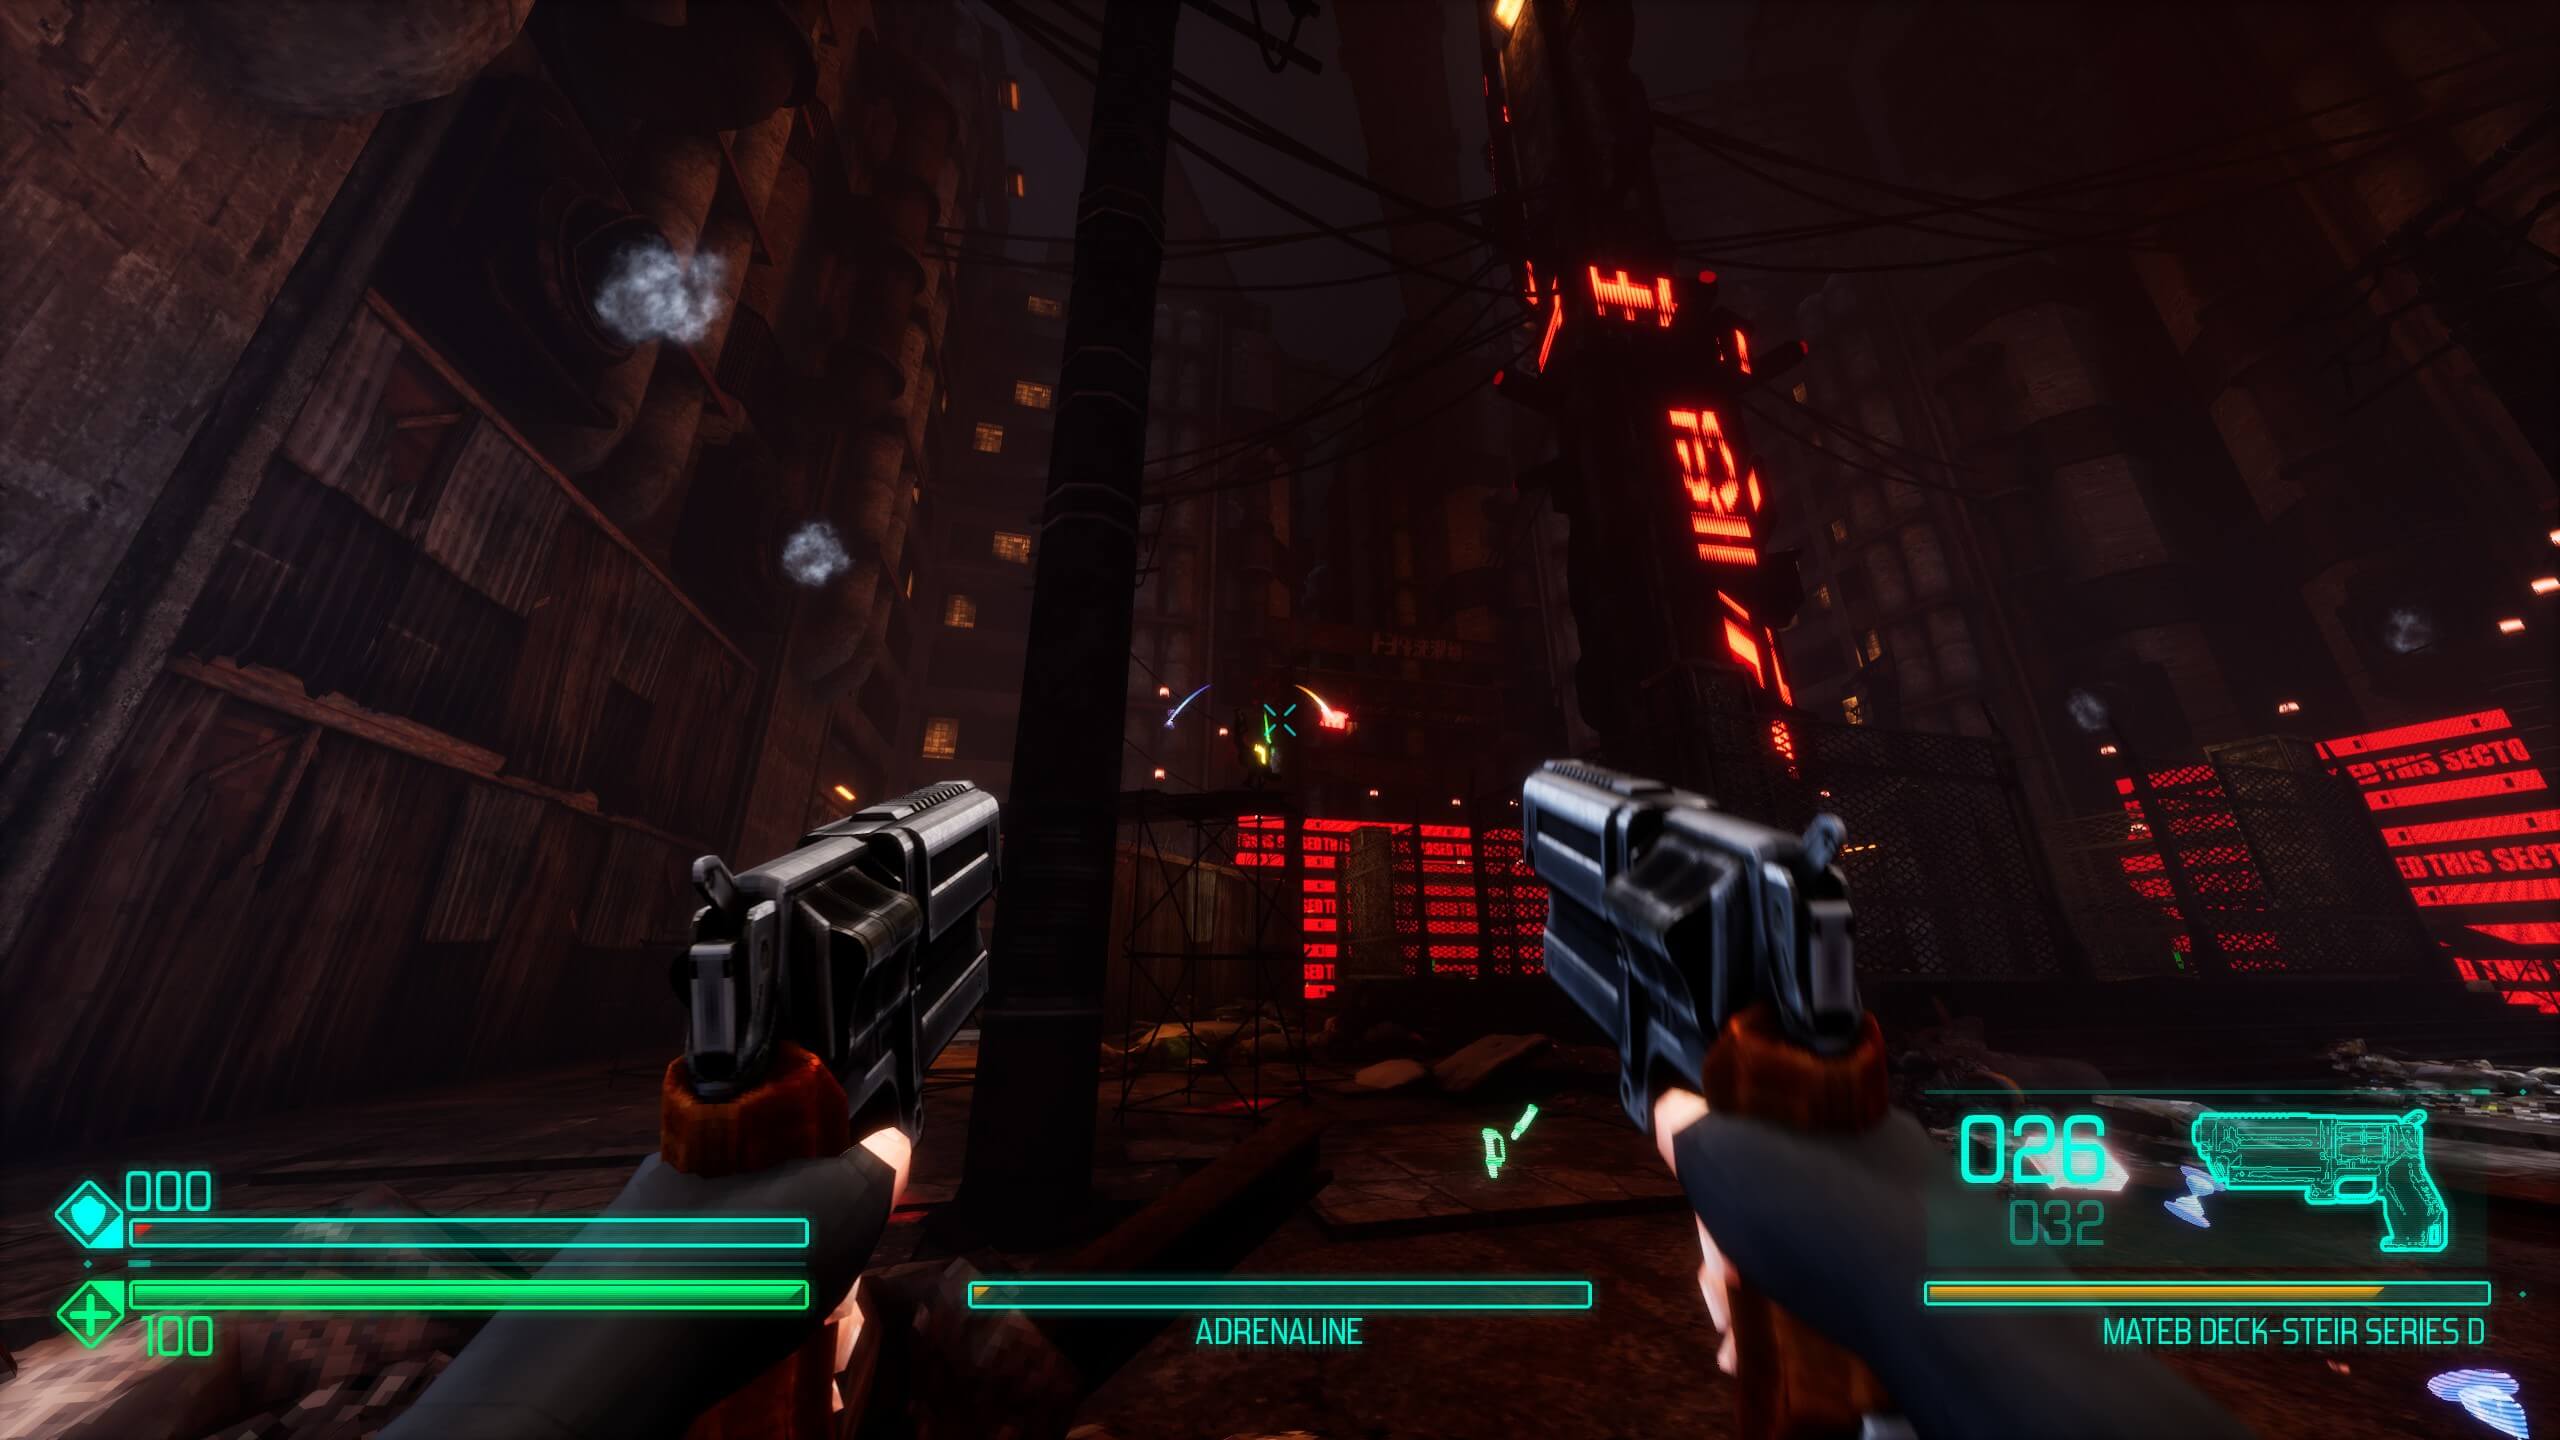 You look out into the dystopian, dreary city with dual revolvers in hand as an enemy is killed in the distance - pickups falling from them as they die. The bottom left shows two bars - one for armor and the other for health - with another bar in the middle for adrenaline. The bottom right shows how many bullets are left in your weapon out of how many max.